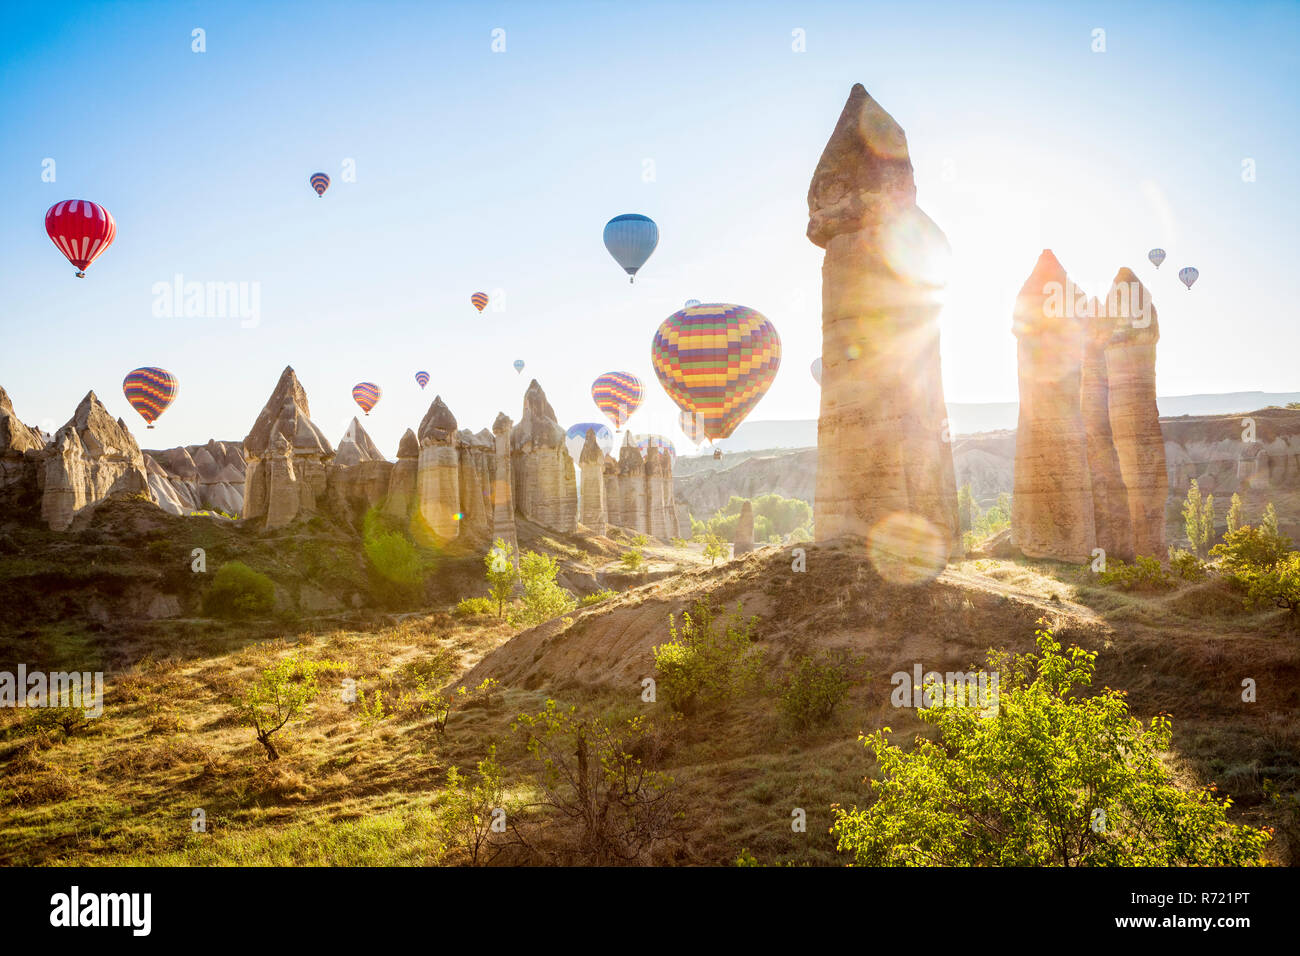 Hot air balloons over Love Valley near Goreme in Cappadocia, Turkey (region of Anatolia). Taken shortly after sunrise. No balloons added afterwards. Stock Photo